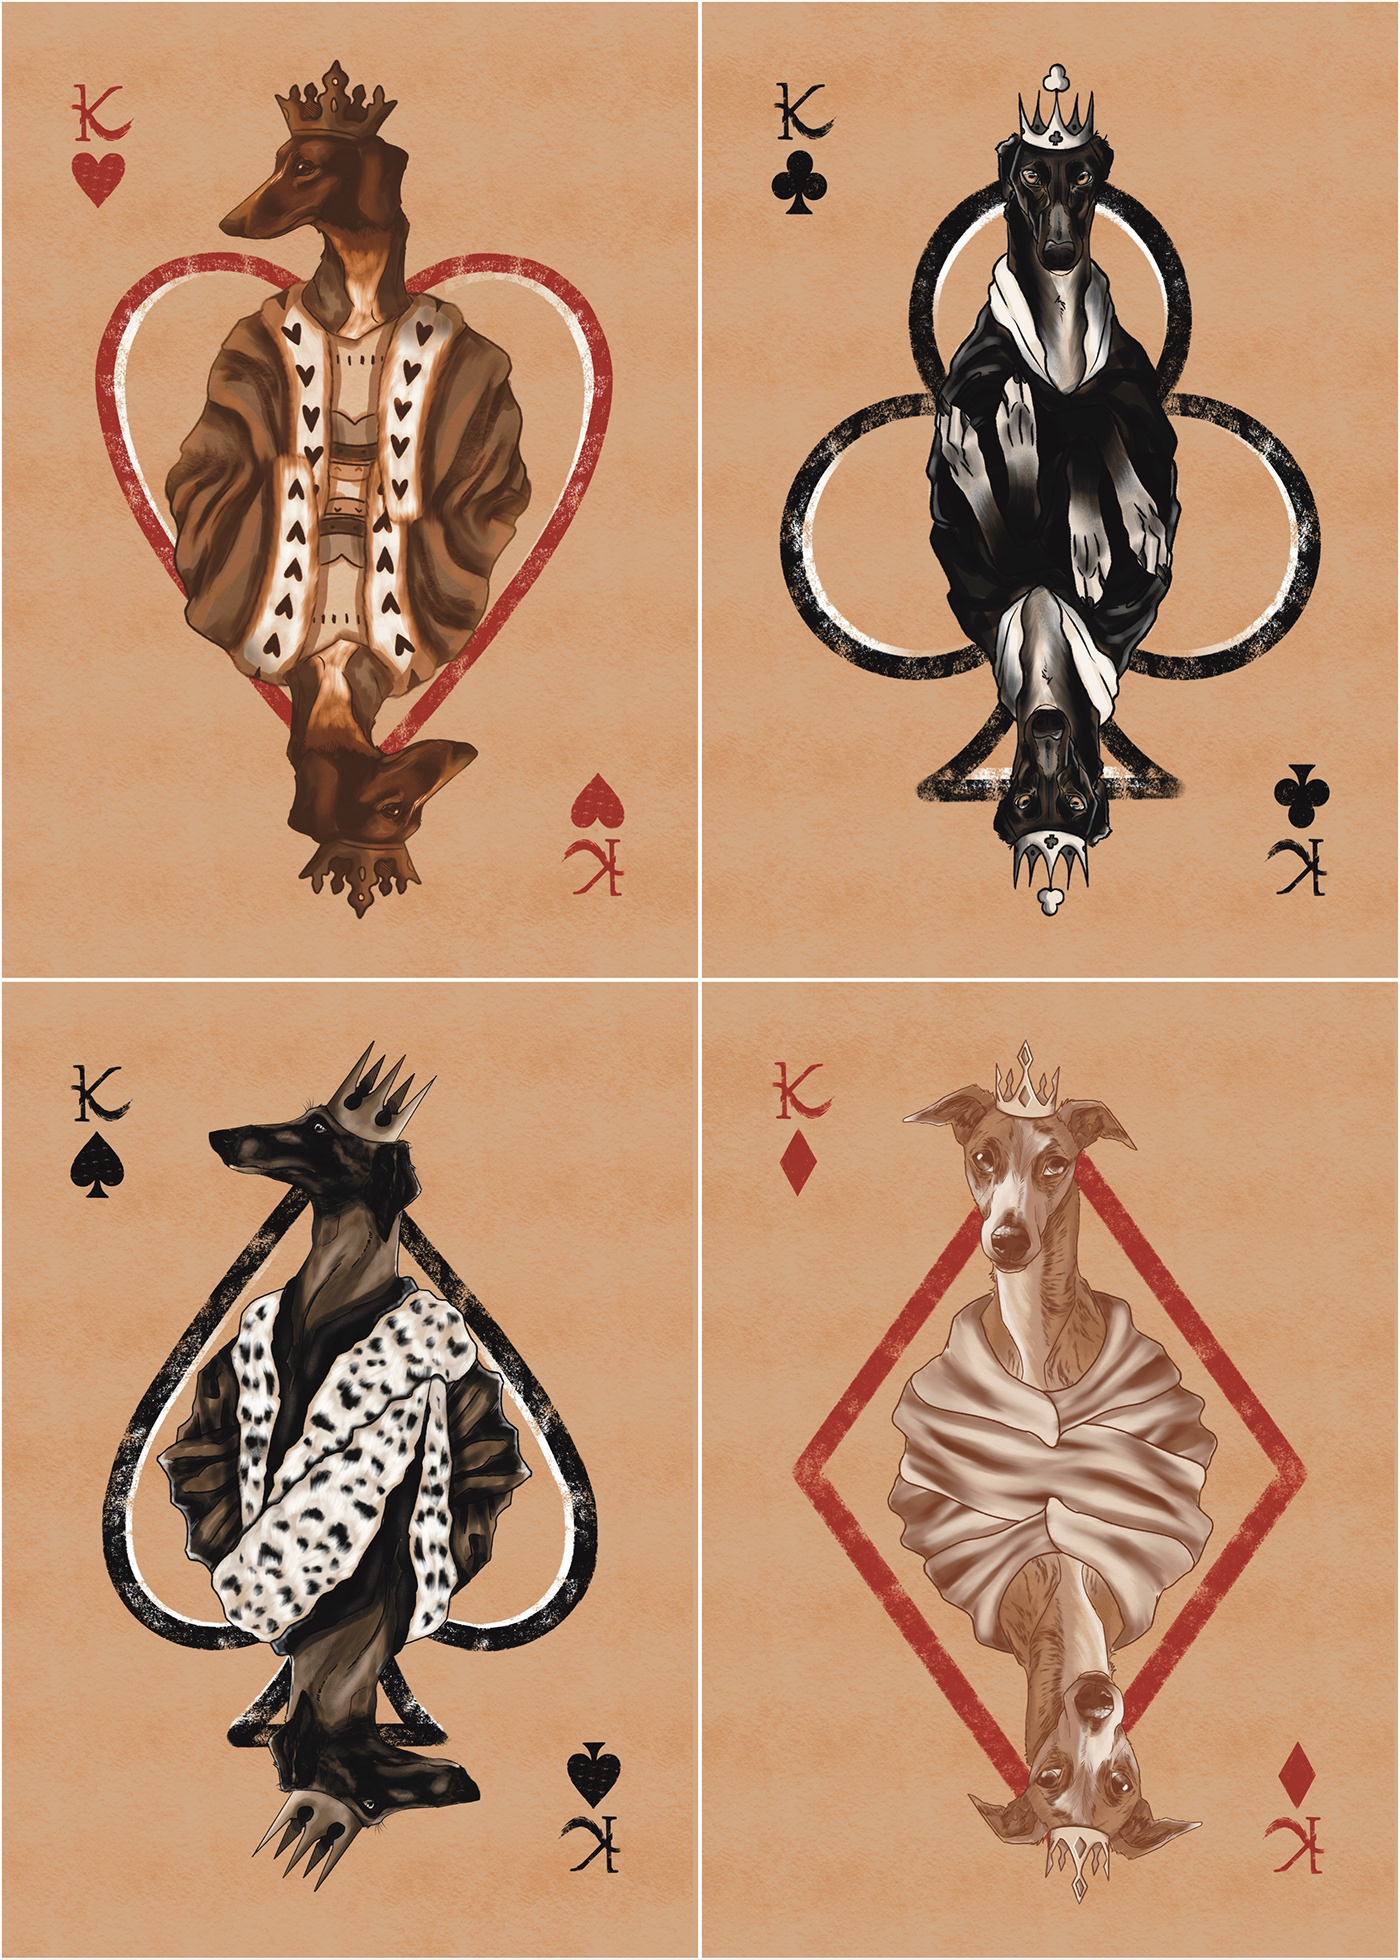 Cards design cards whippet dogs hounds design арт greyhounds